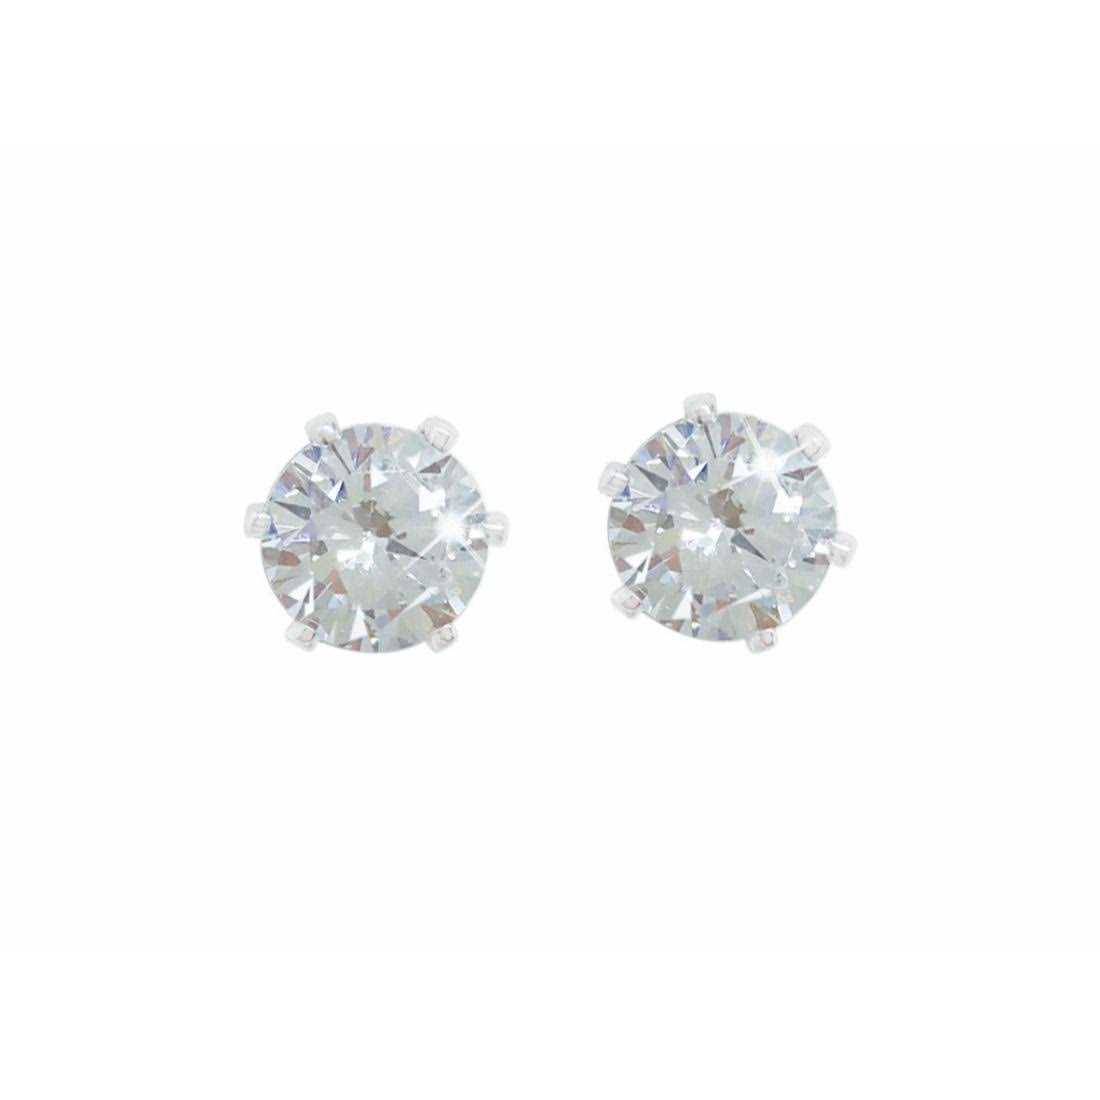 Tipperary Crystal Silver Stud Earrings Set with 4mm Clear Stones